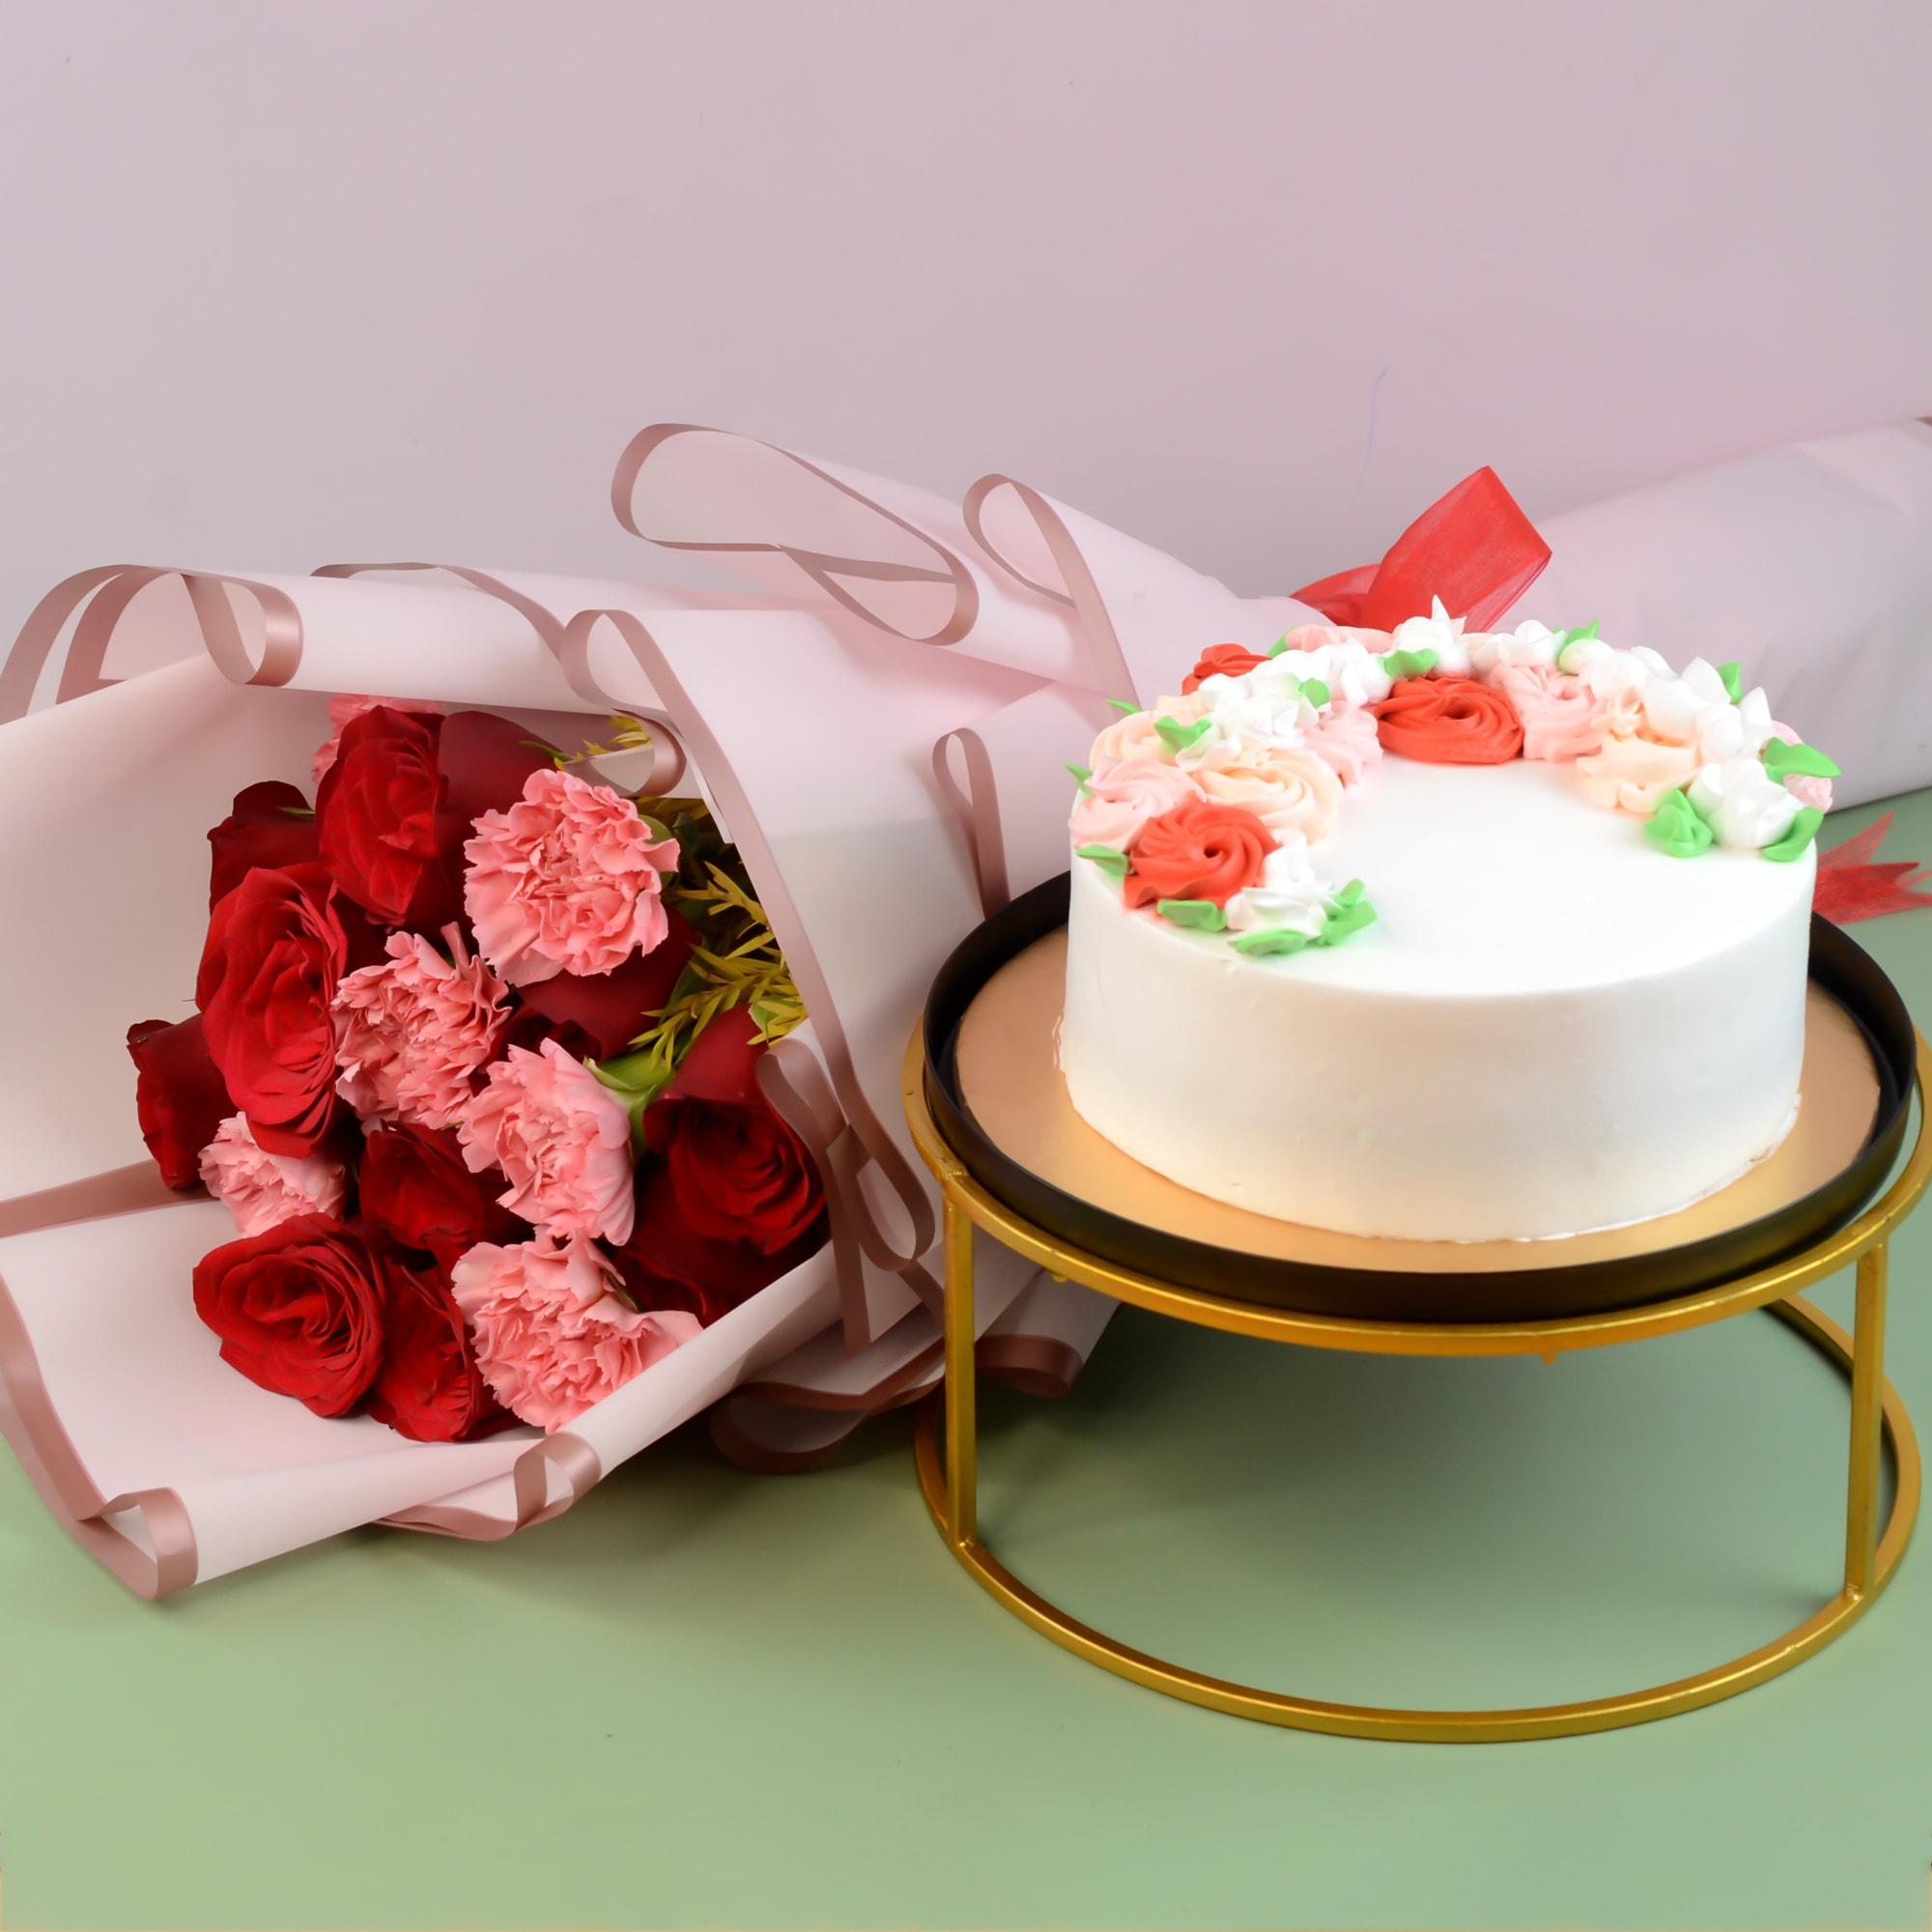 Online Flowers and Cake Delivery | Send Cake and Flowers Online